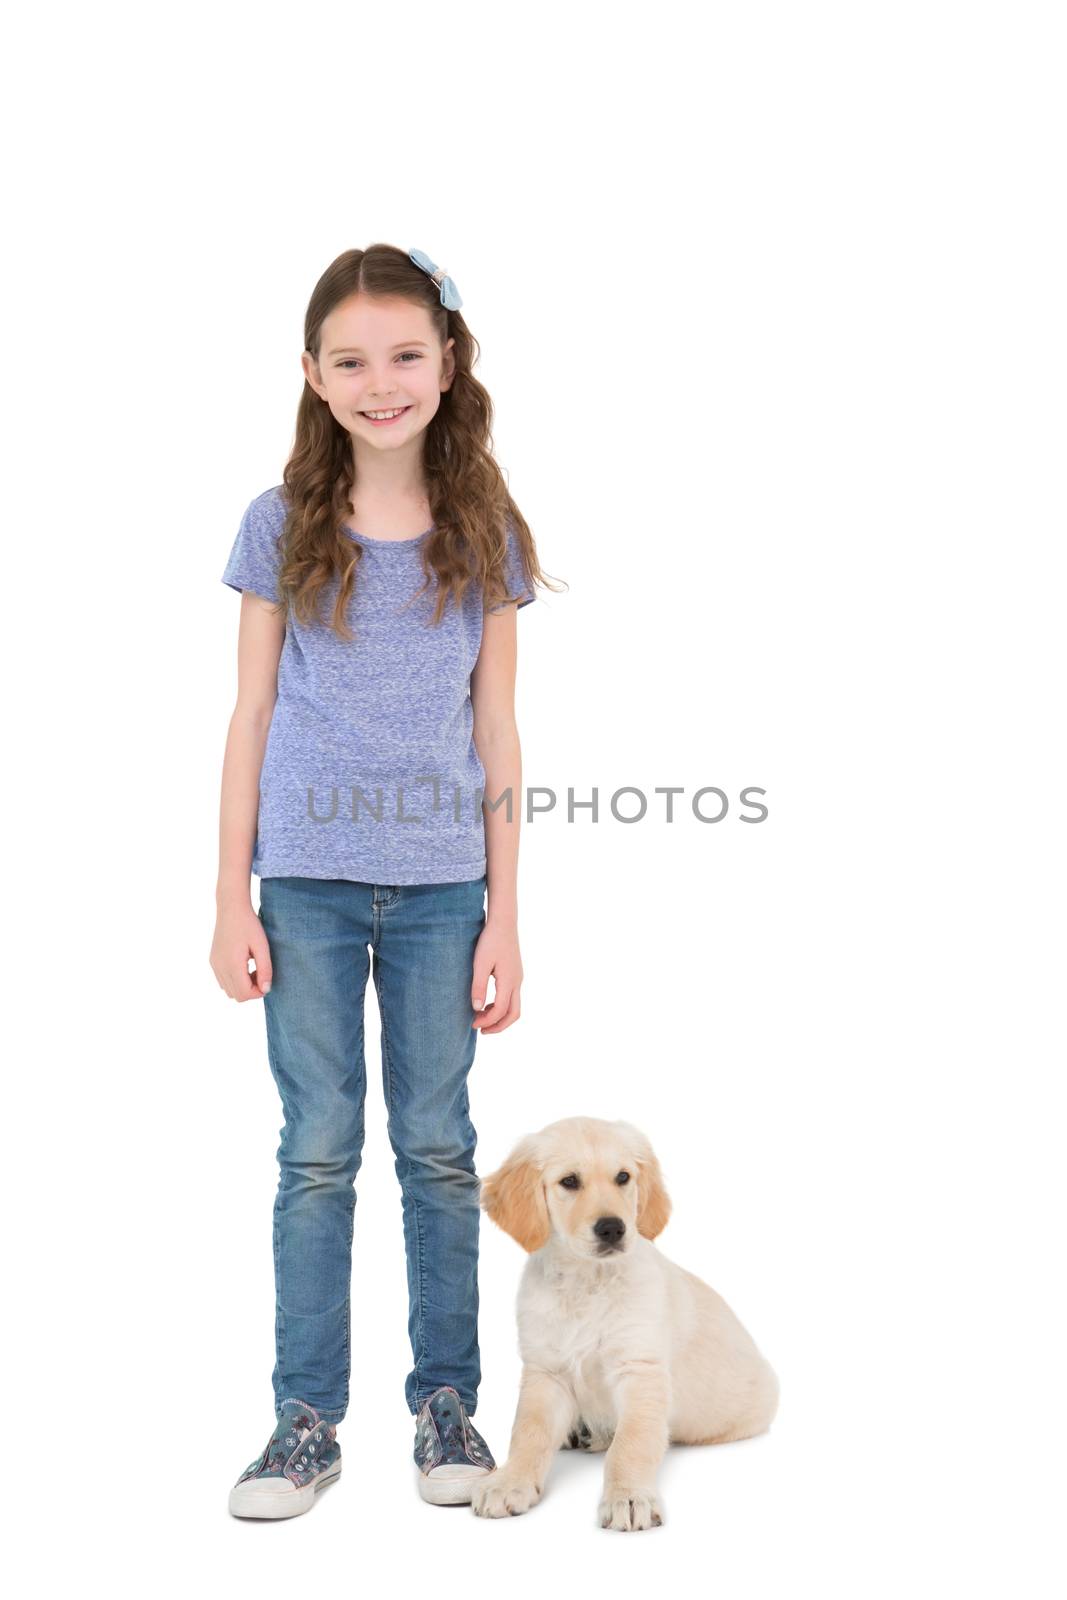 Smiling little girl standing next to dog on white background 